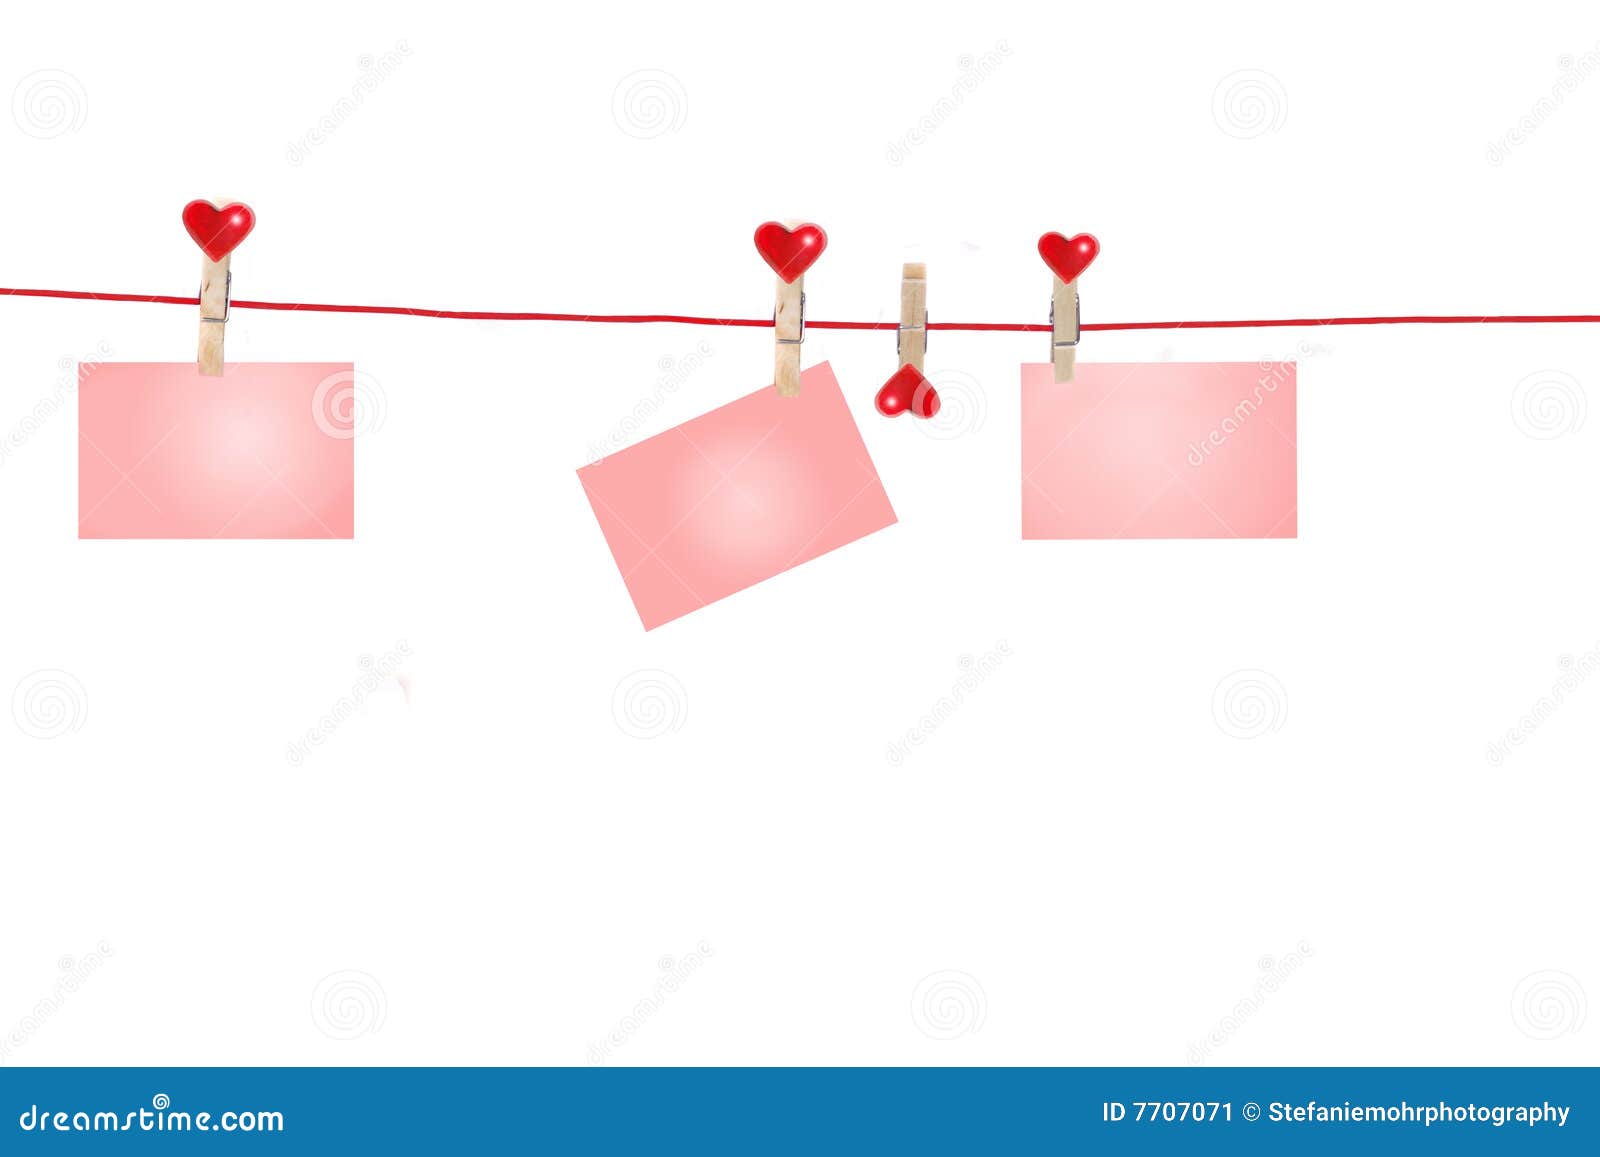 Clothes-Line for hearts stock illustration. Illustration of concept ...